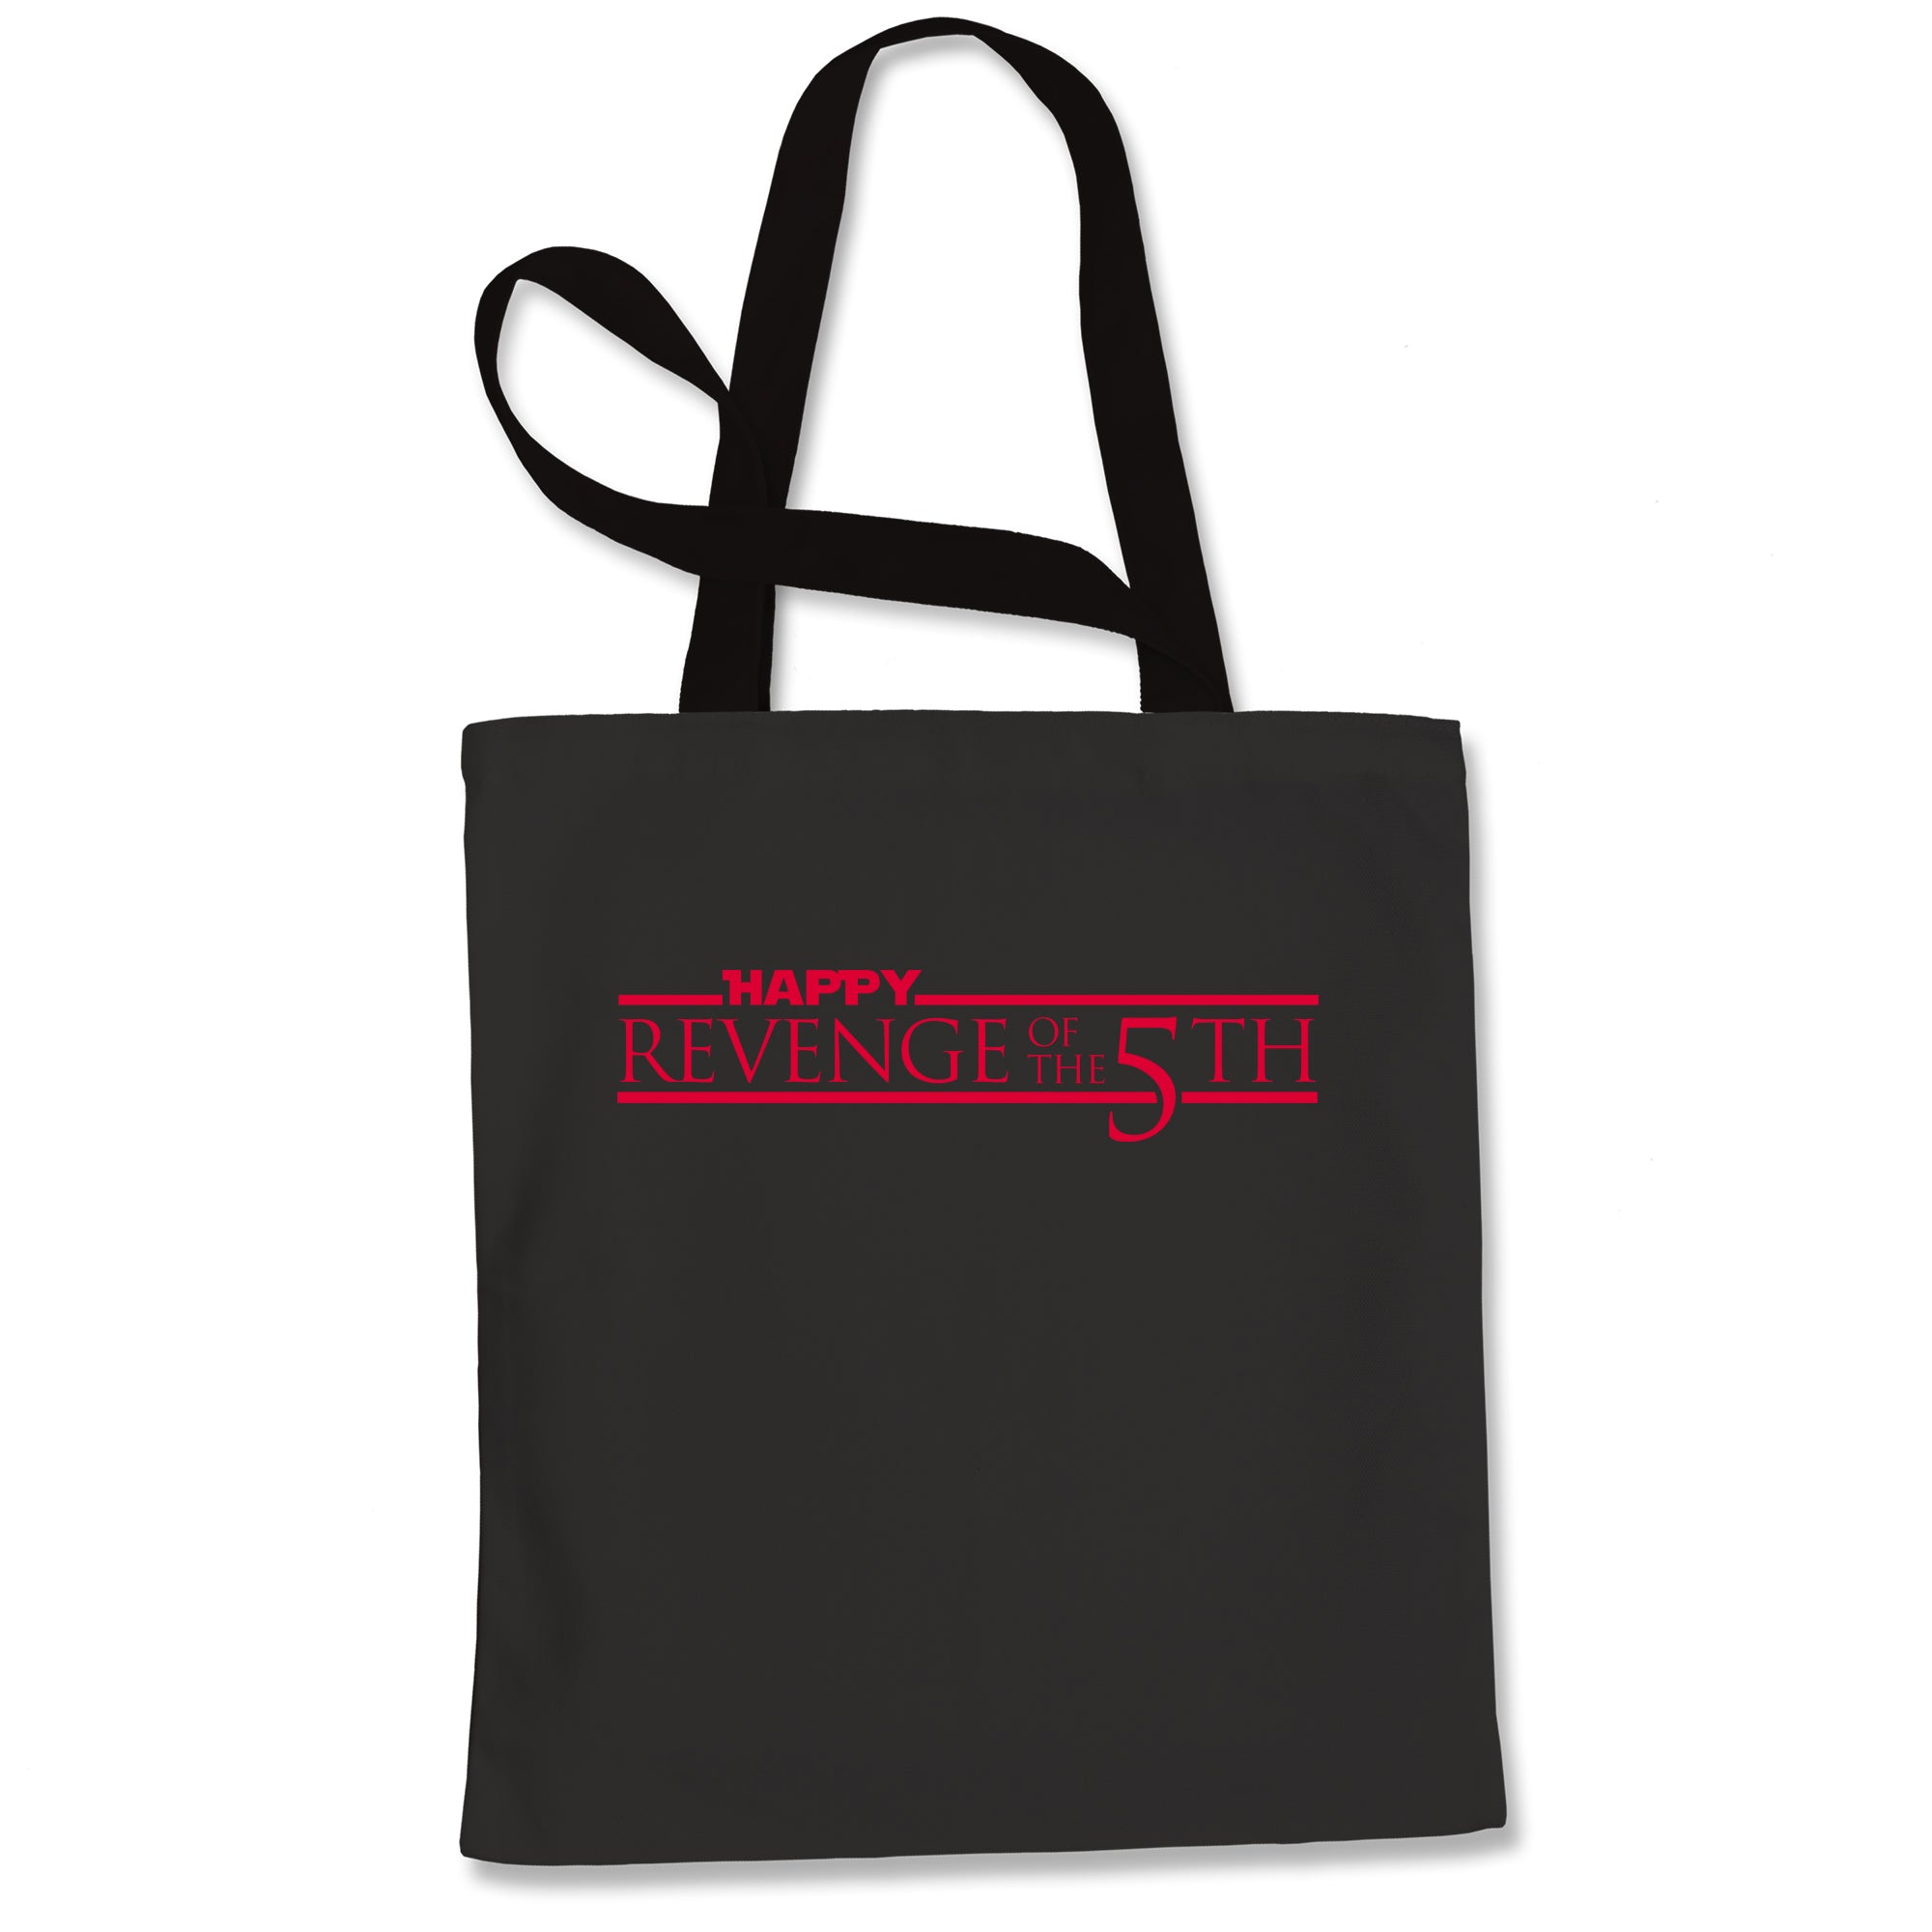 Revenge of the 5th Fifth Tote Bag